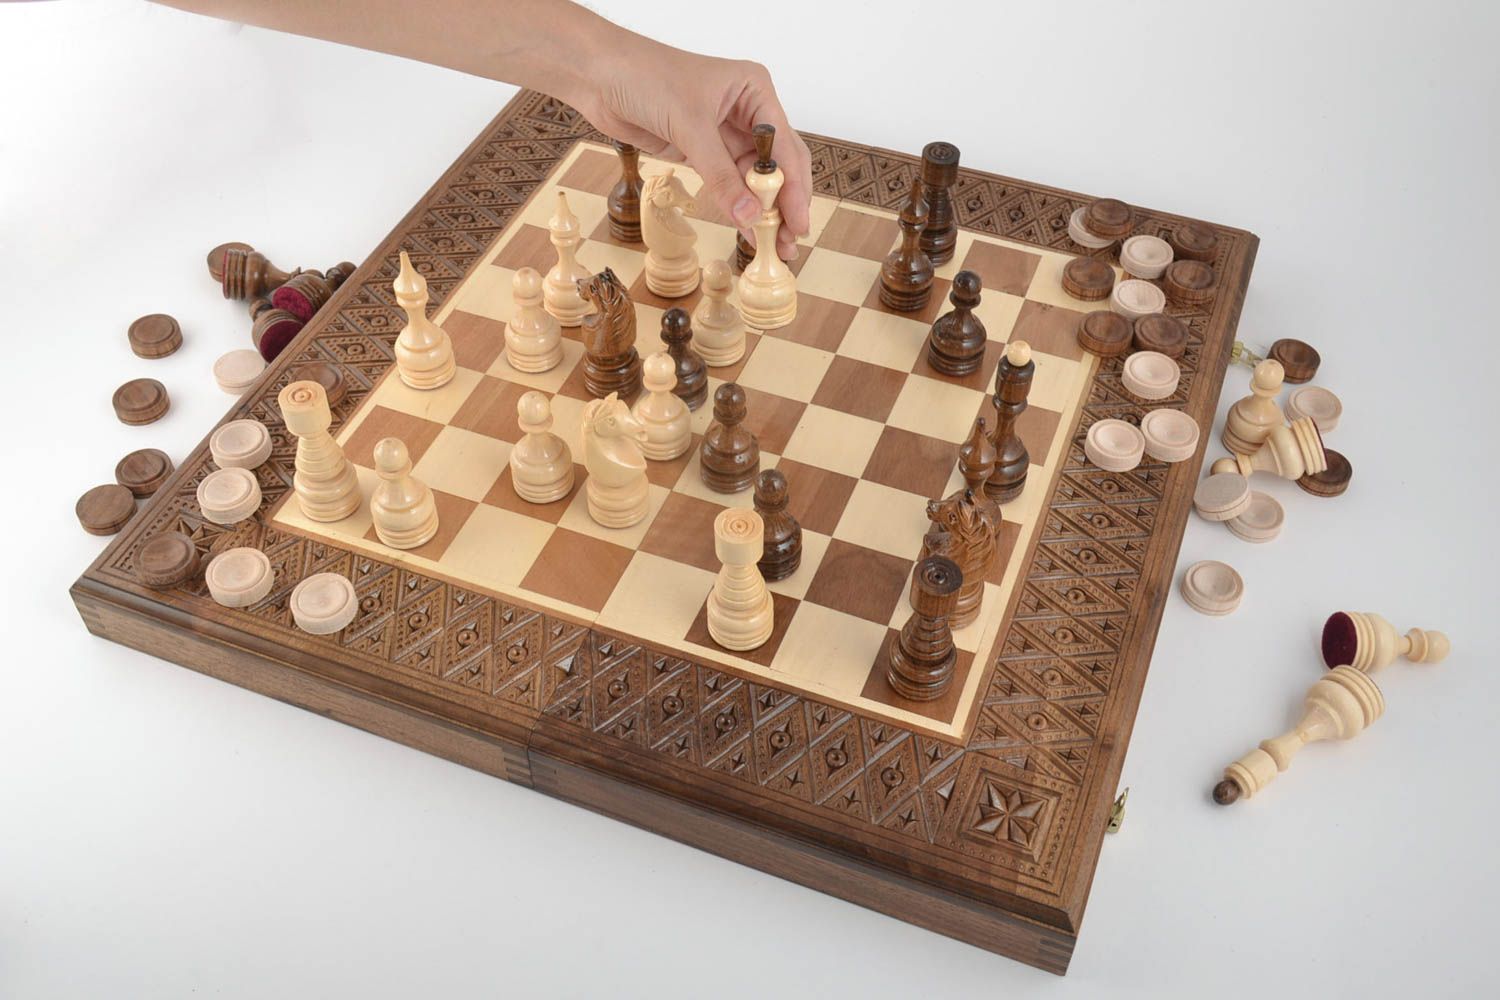 Unusual handmade wooden chessboard chess pieces board games birthday gift ideas photo 5